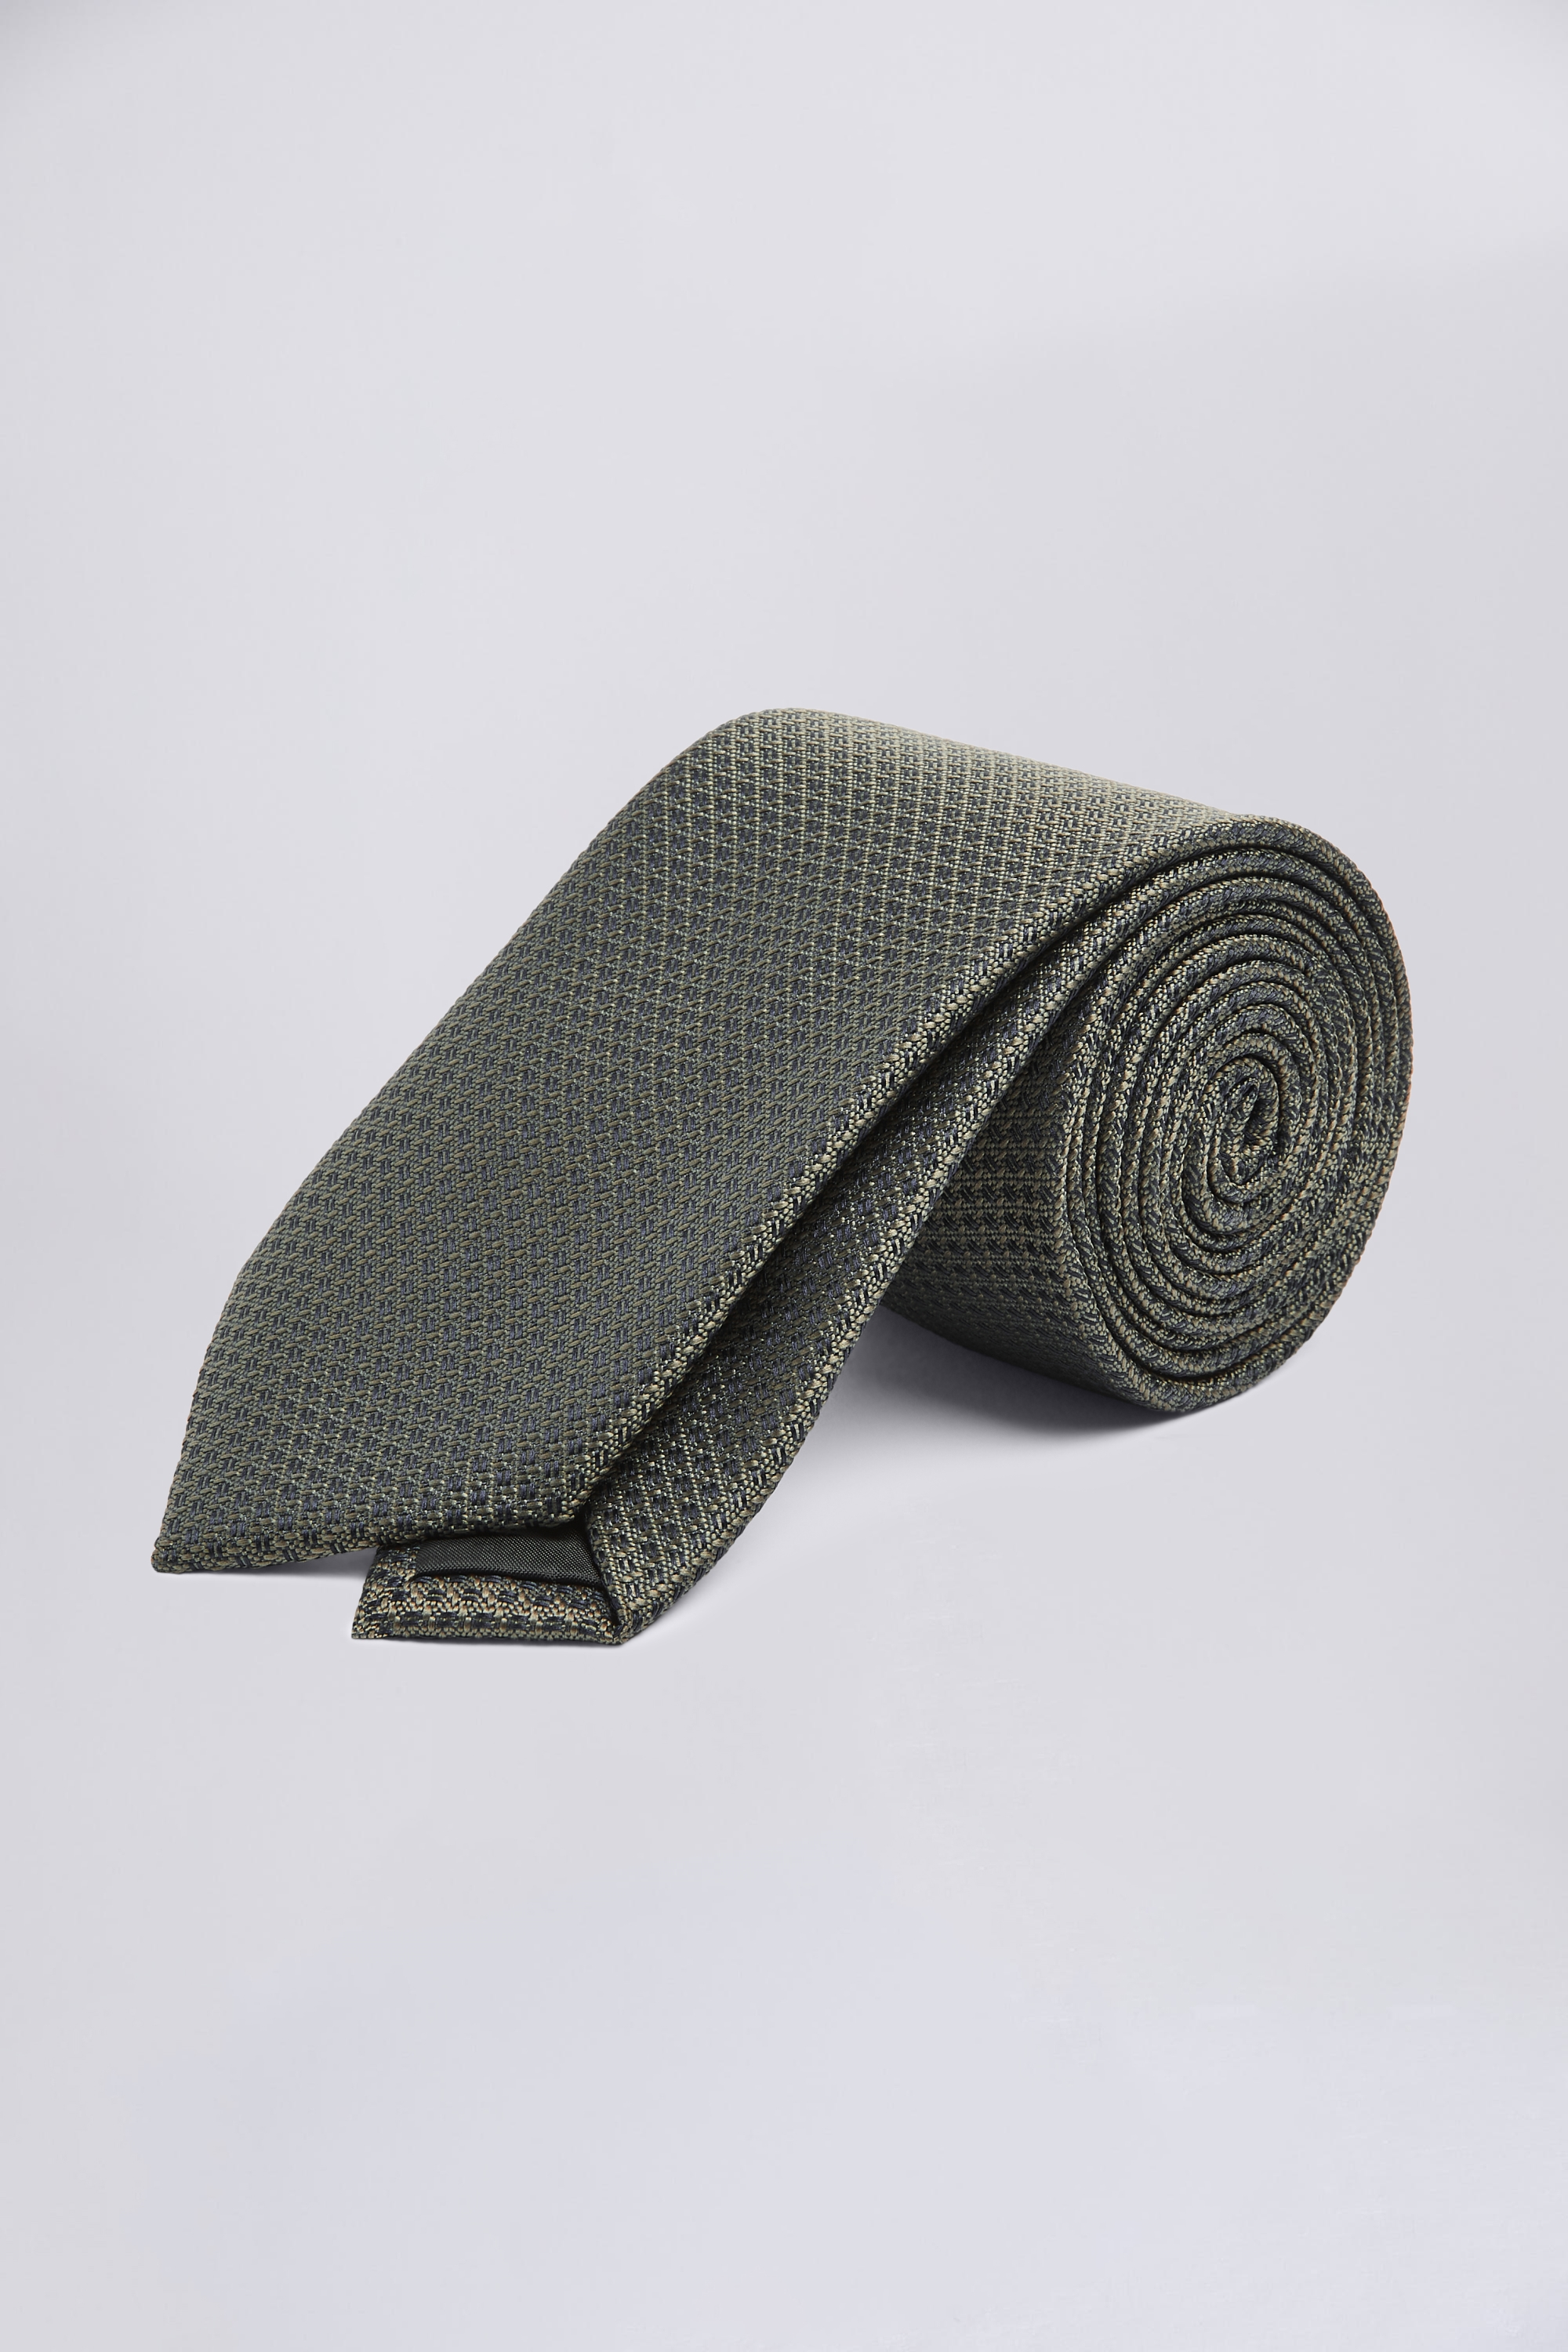 Thyme Green Textured Tie | Buy Online at Moss